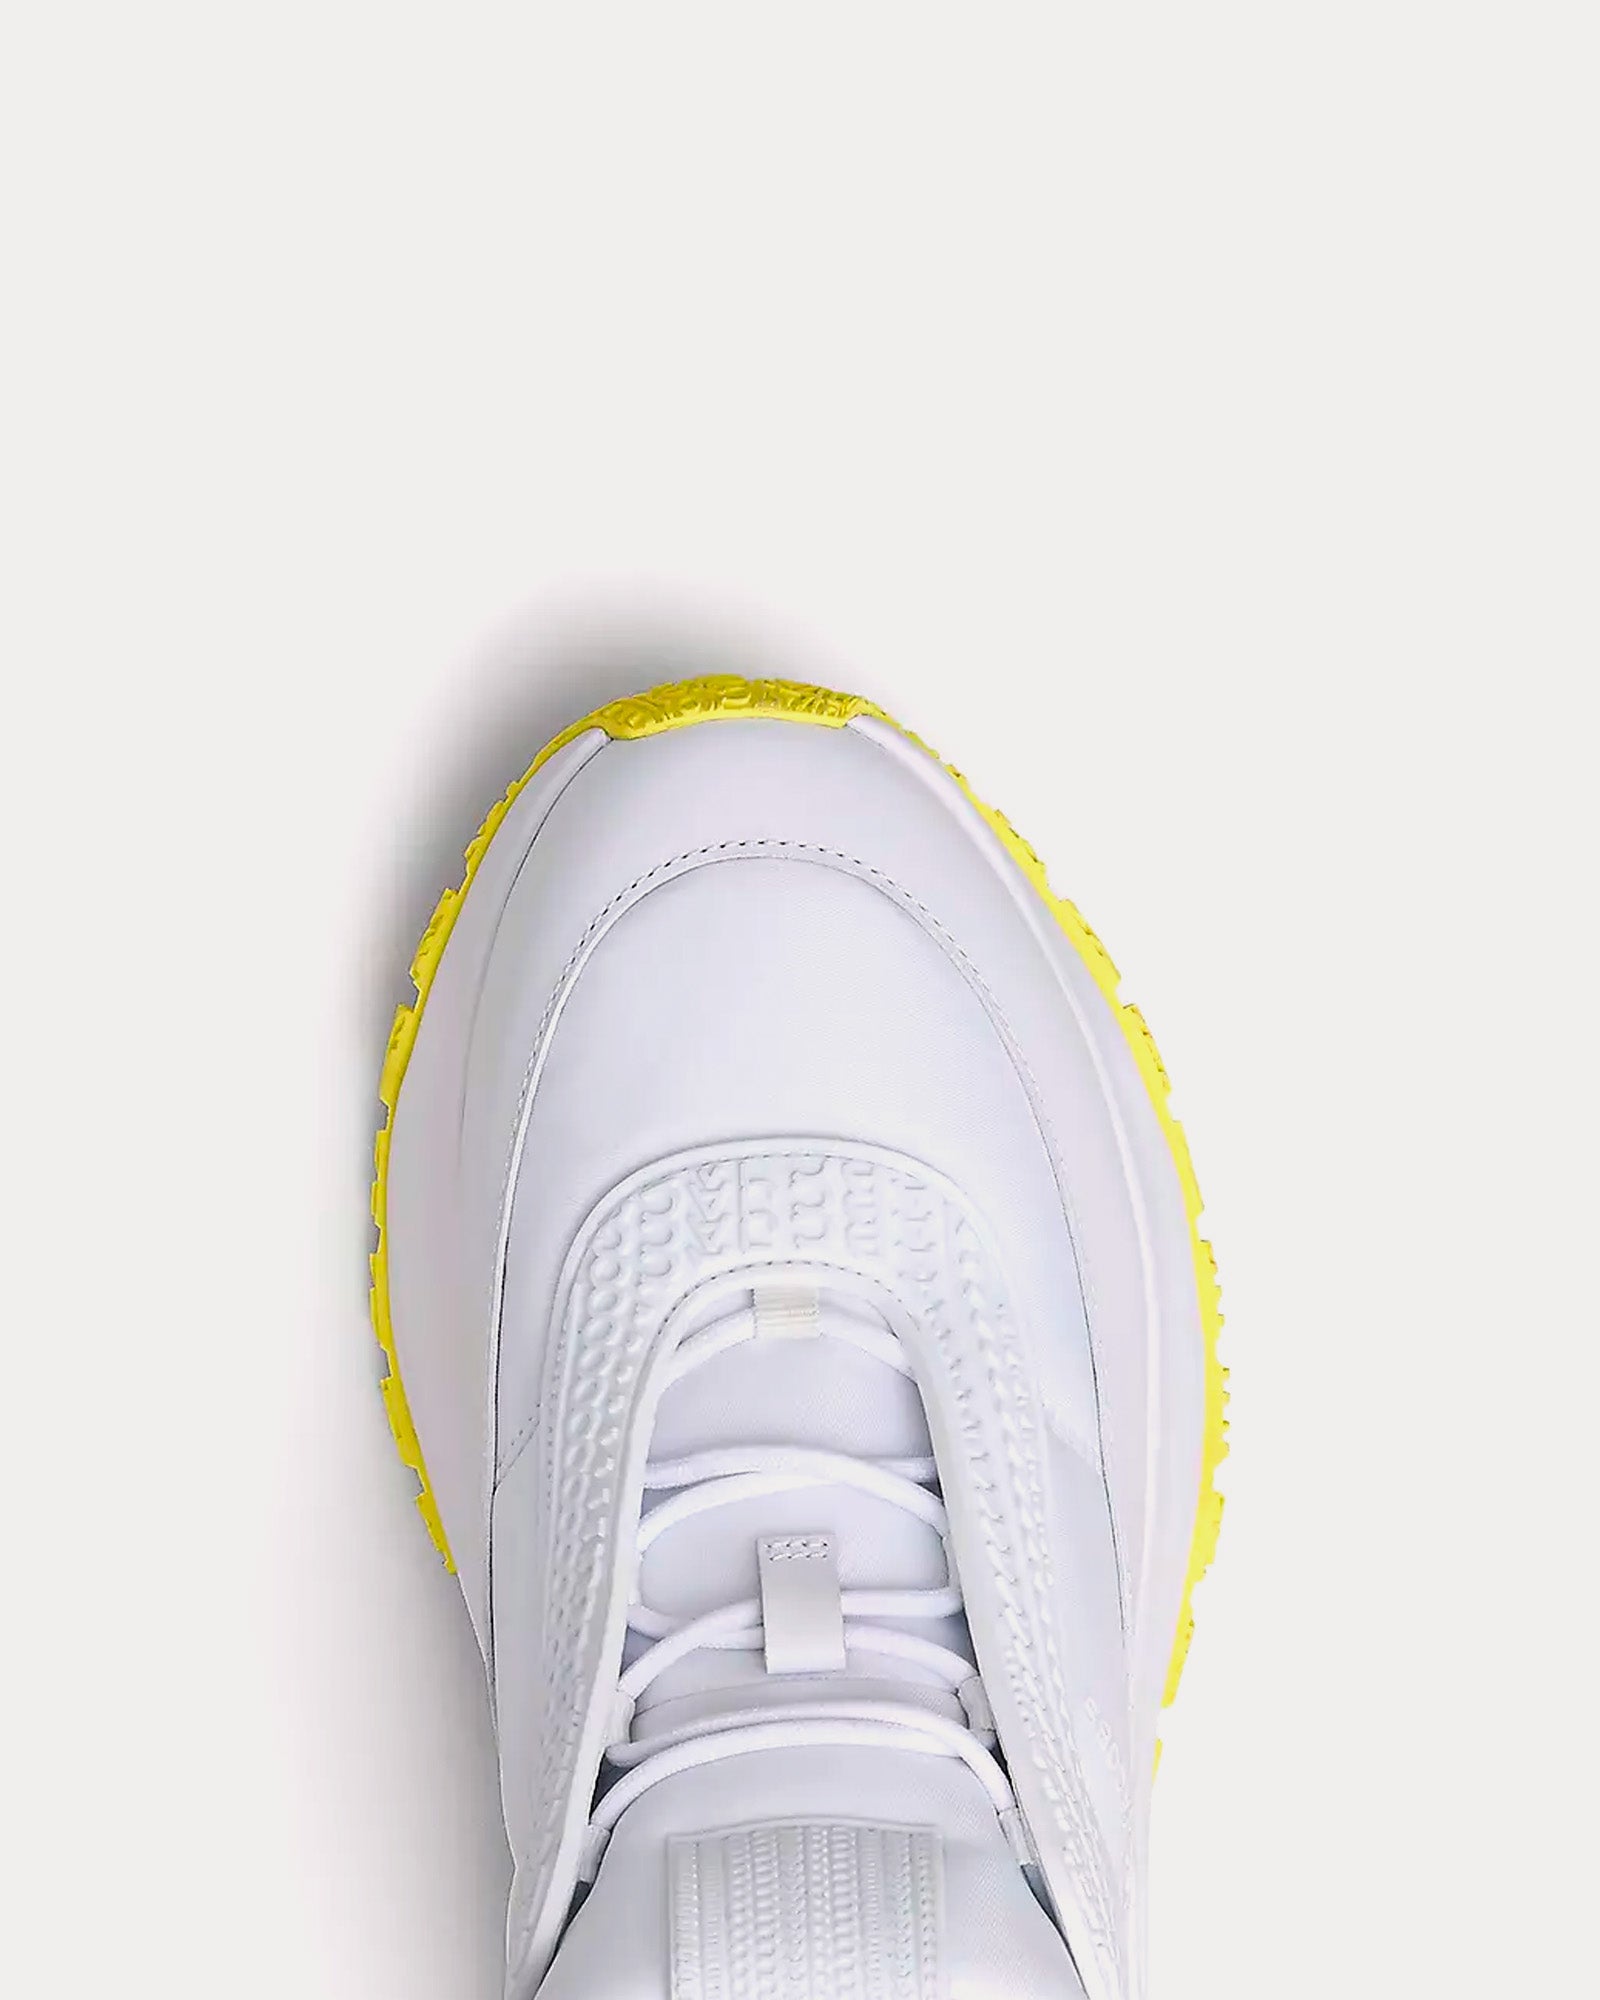 Marc Jacobs - The Lazy Runner White / Yellow Low Top Sneakers